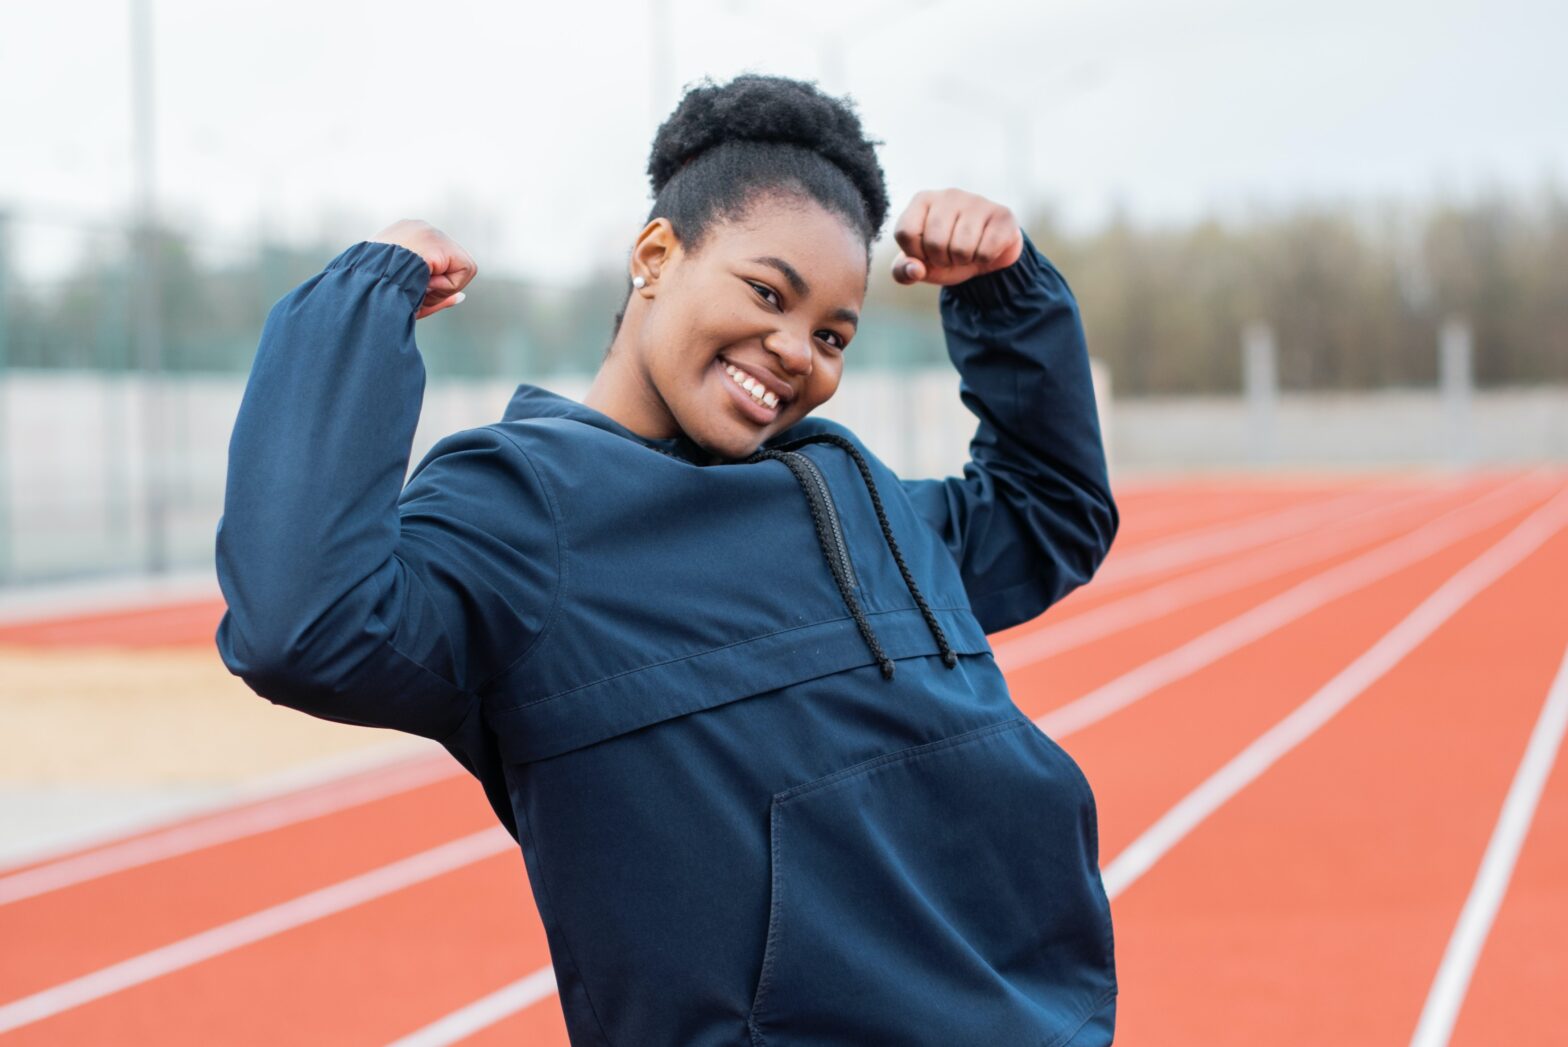 Wear These Active Jackets to Stay Warm During Your Fall Night Workout